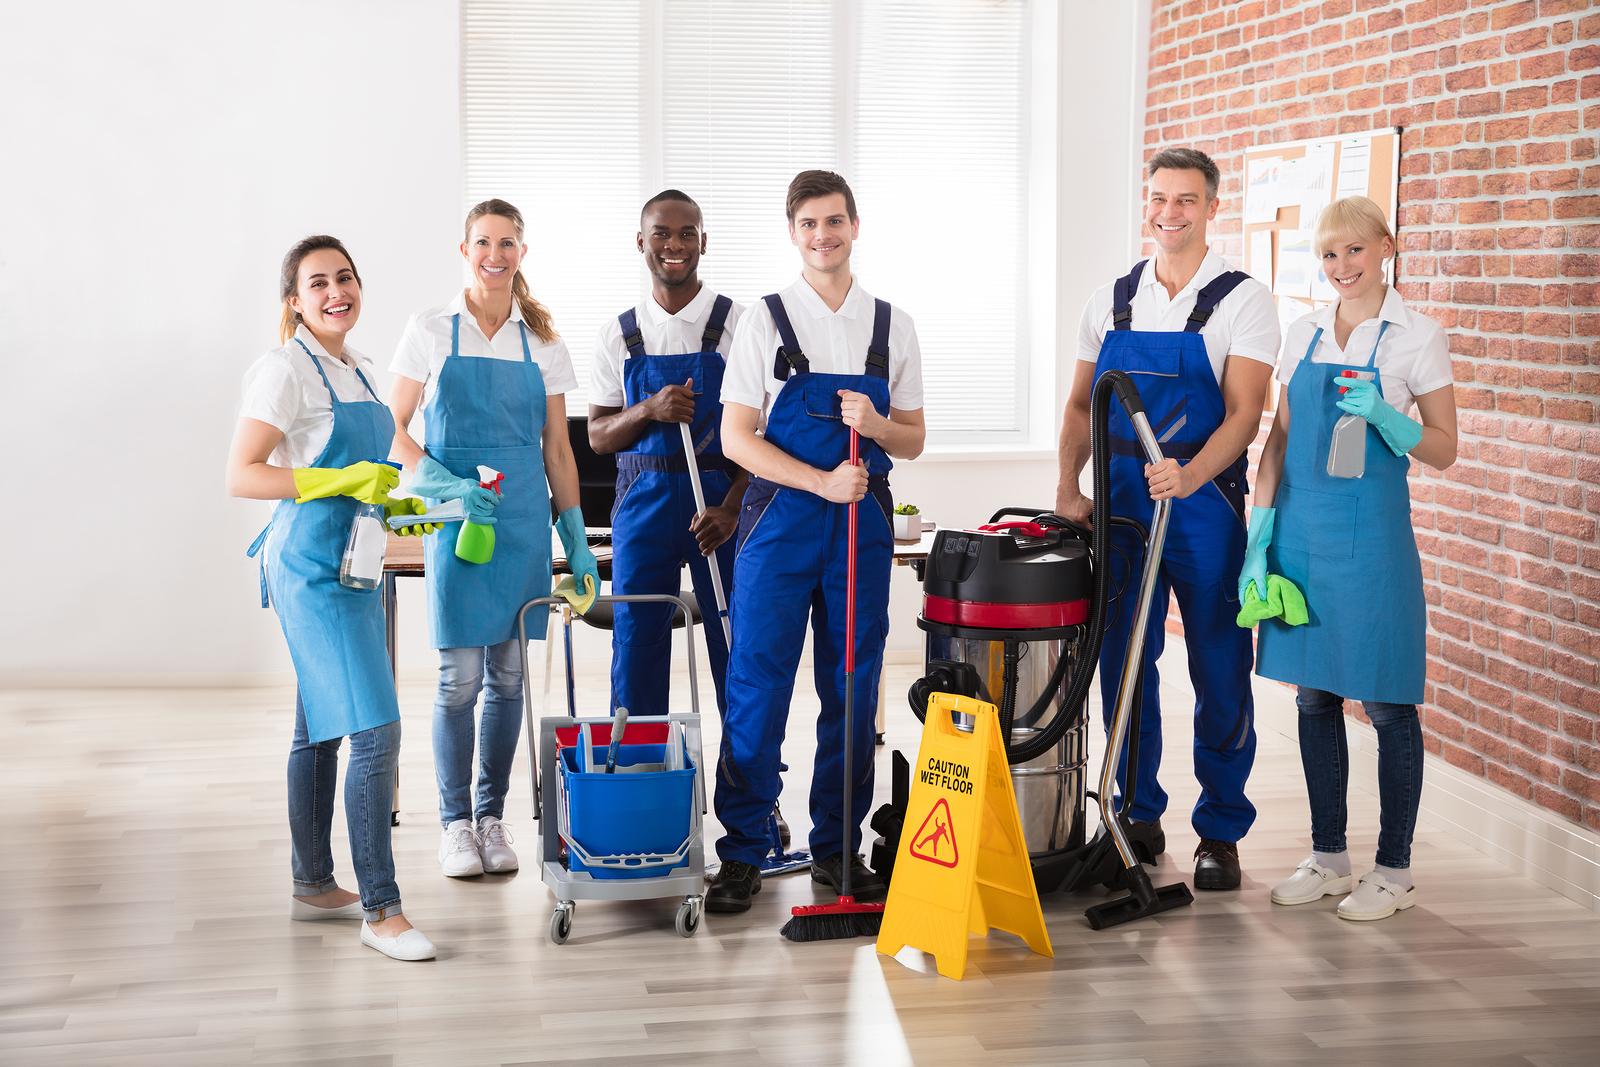 What Services Do Cleaning Companies Typically Offer?